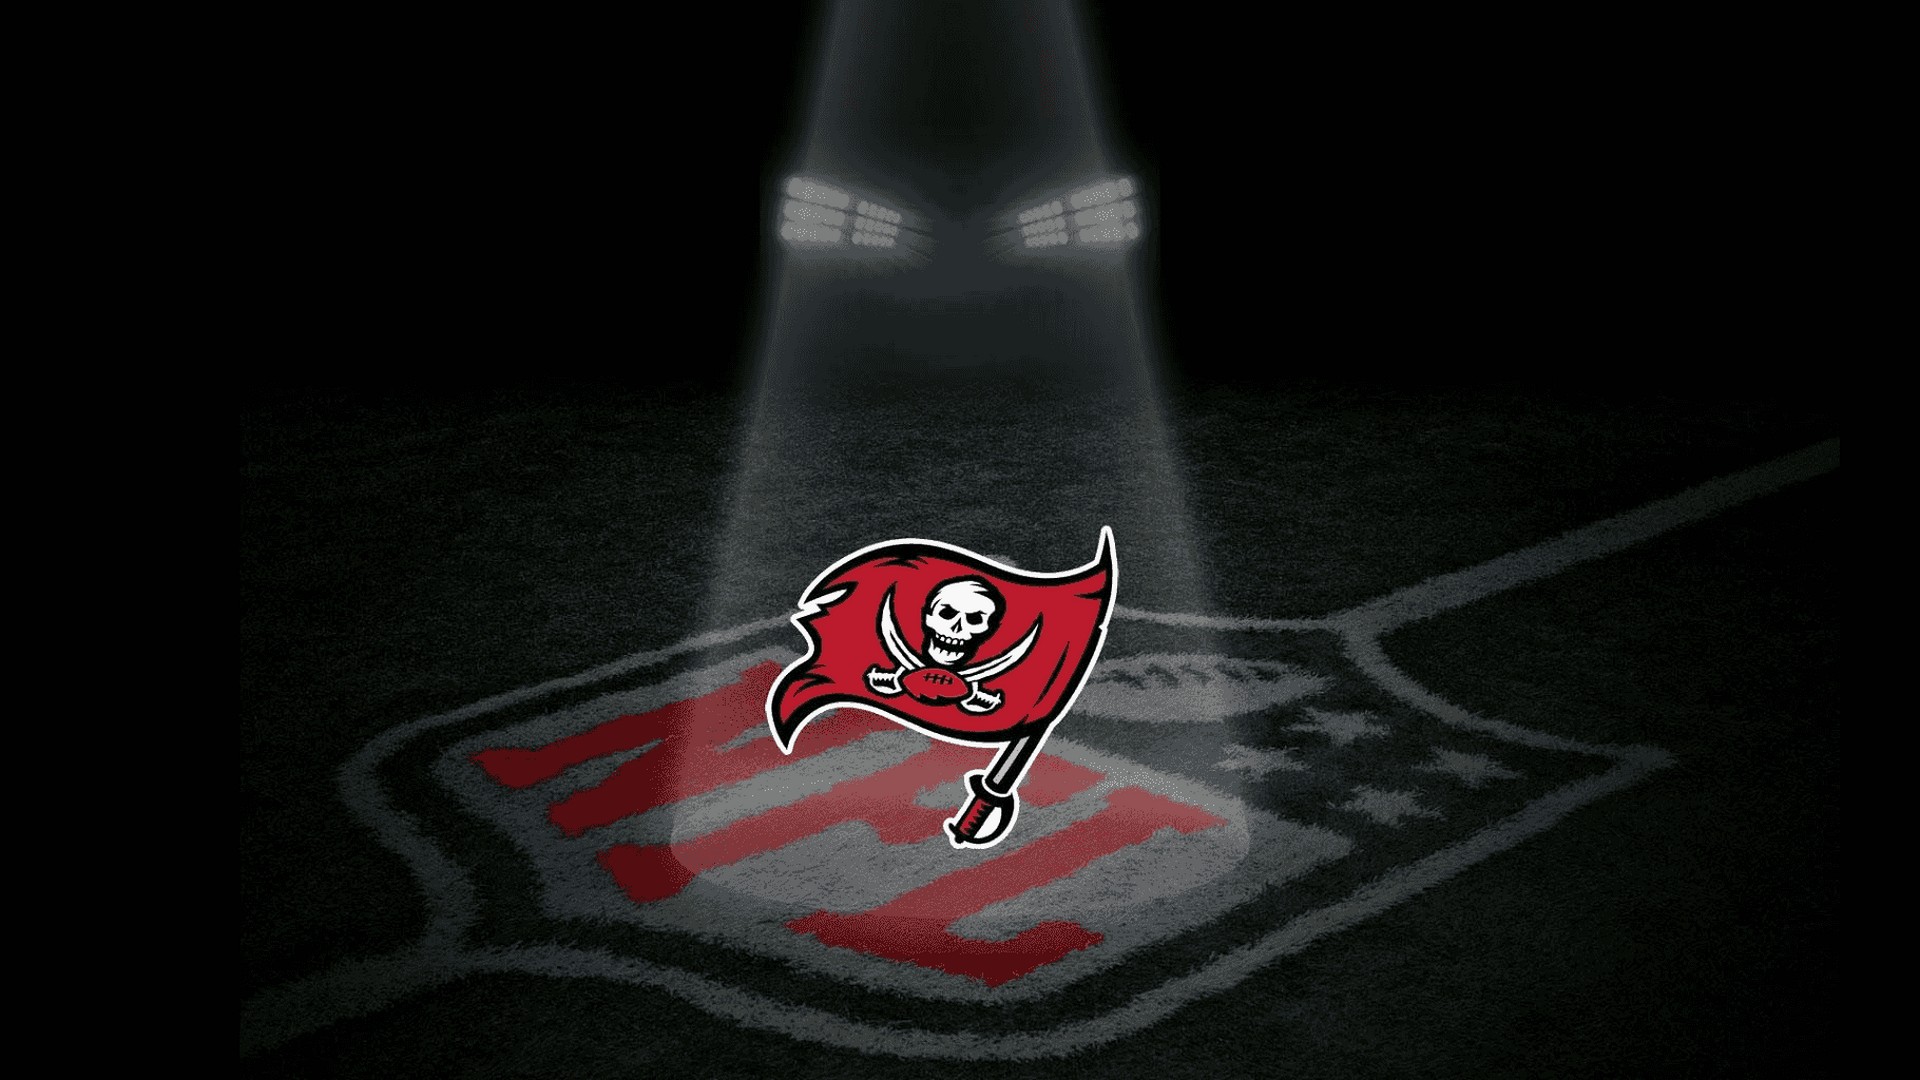 Wallpapers HD Buccaneers with high-resolution 1920x1080 pixel. You can use this wallpaper for your Mac or Windows Desktop Background, iPhone, Android or Tablet and another Smartphone device